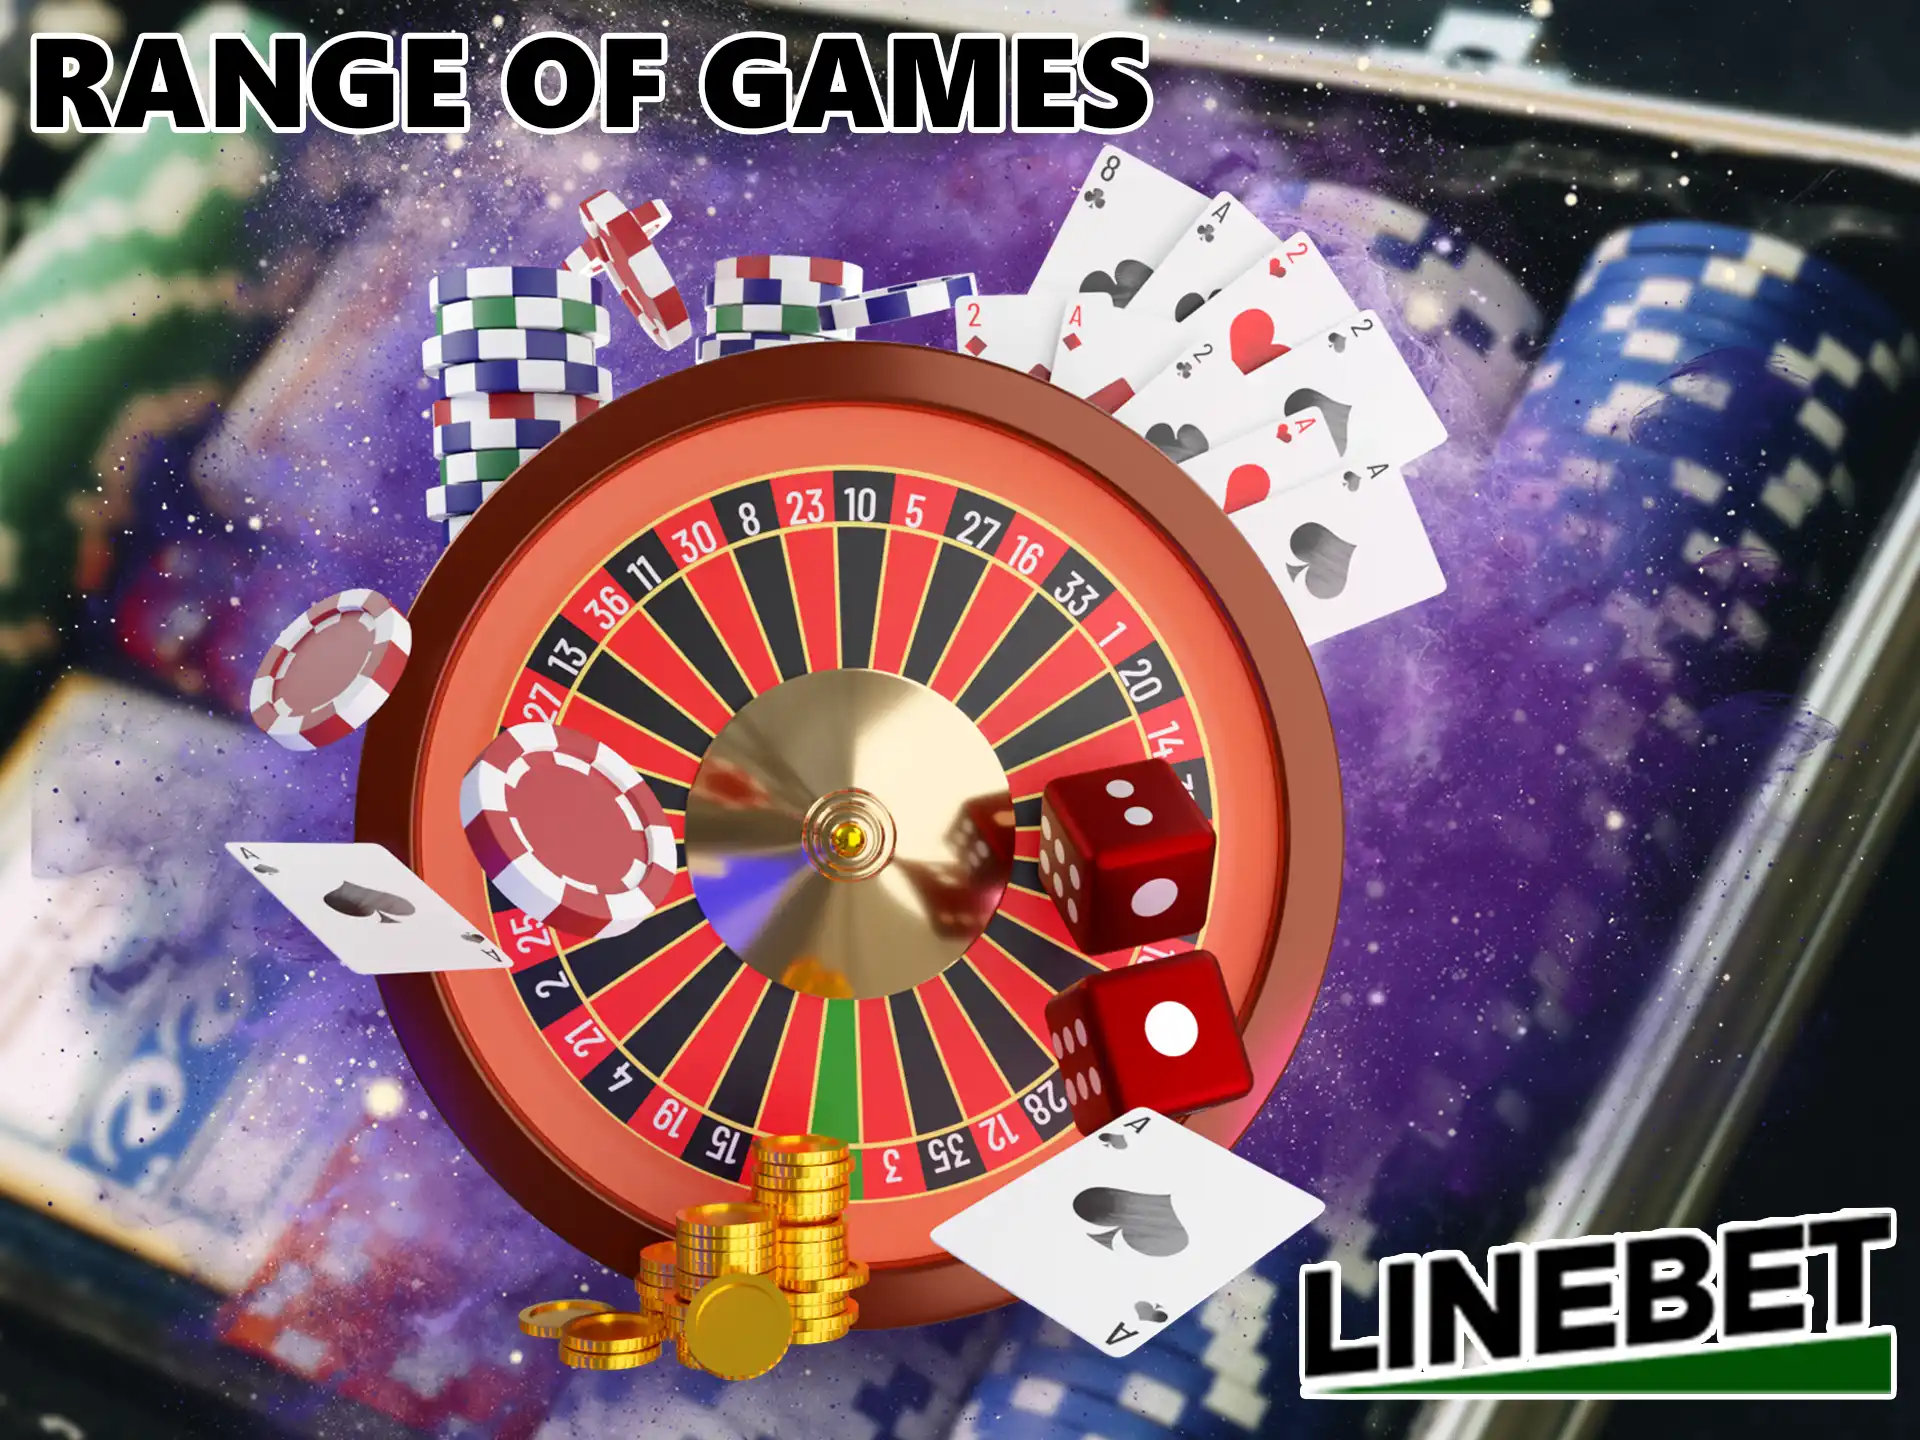 Live Casino Linebet has classic types of games - the number of which will not leave anyone indifferent, you will always find something interesting.